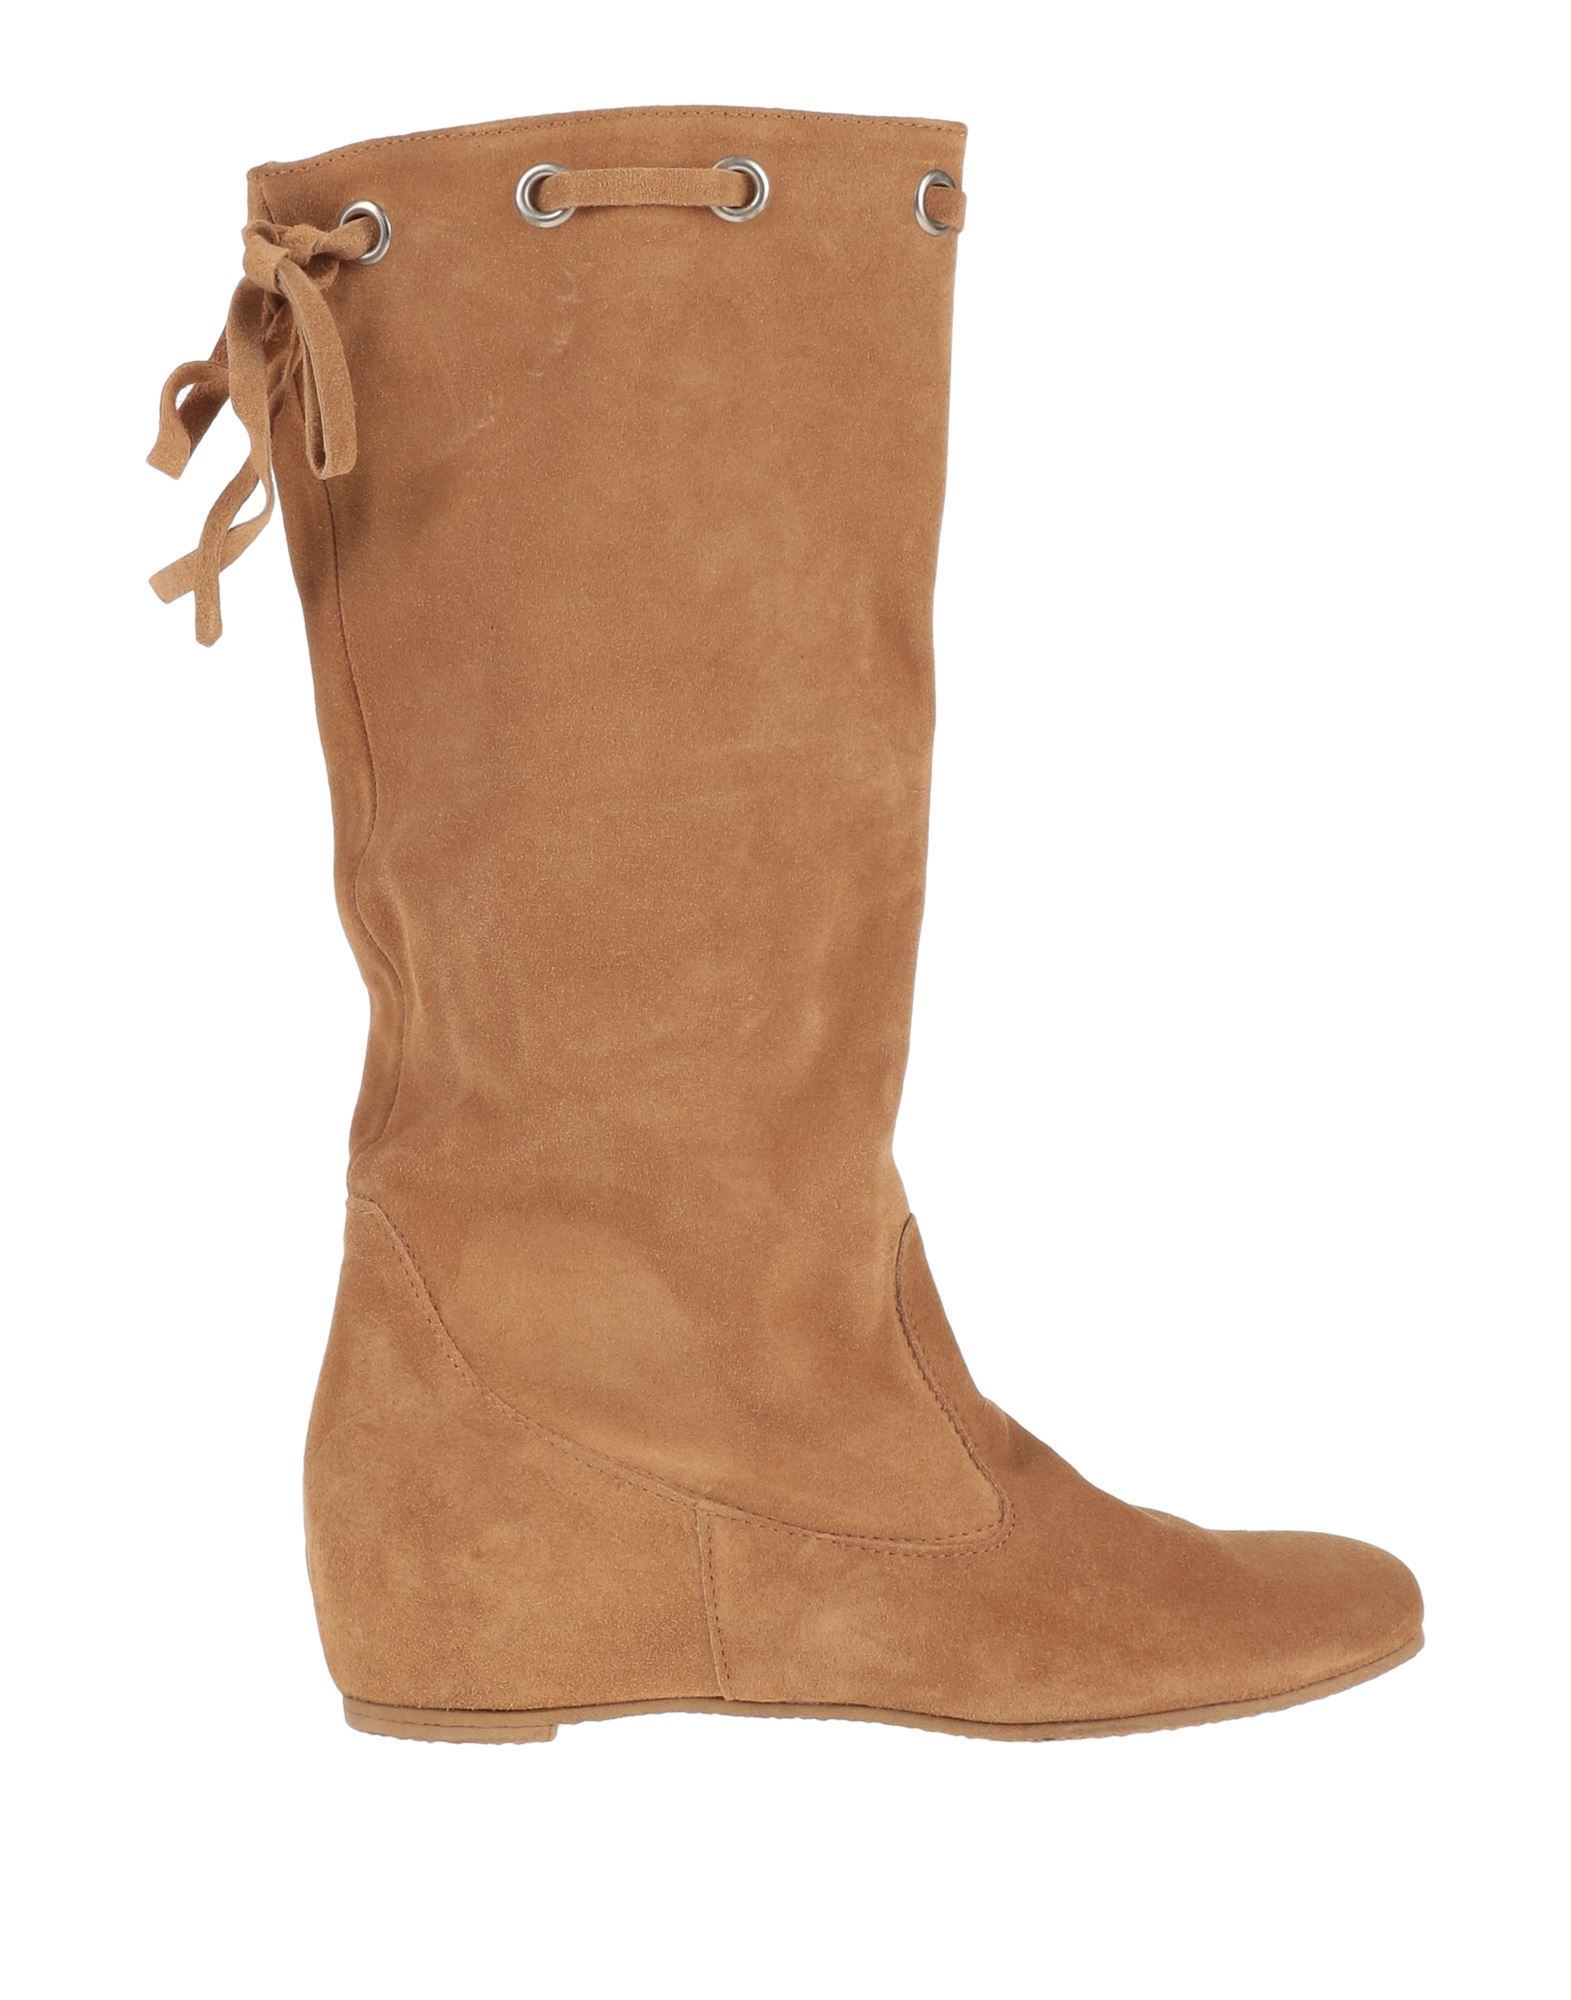 STELE STELE WOMAN BOOT CAMEL SIZE 8 SOFT LEATHER